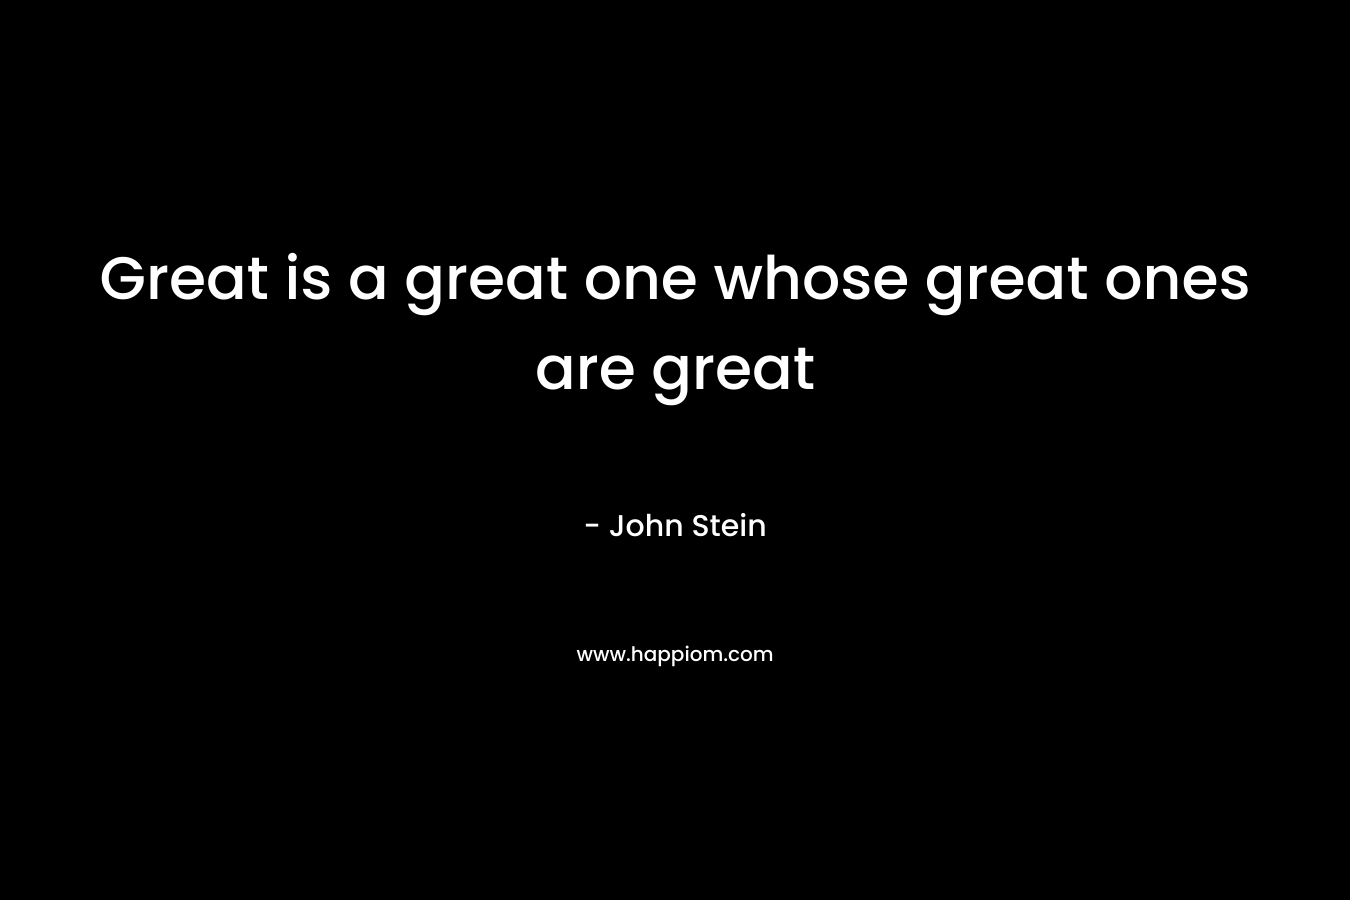 Great is a great one whose great ones are great